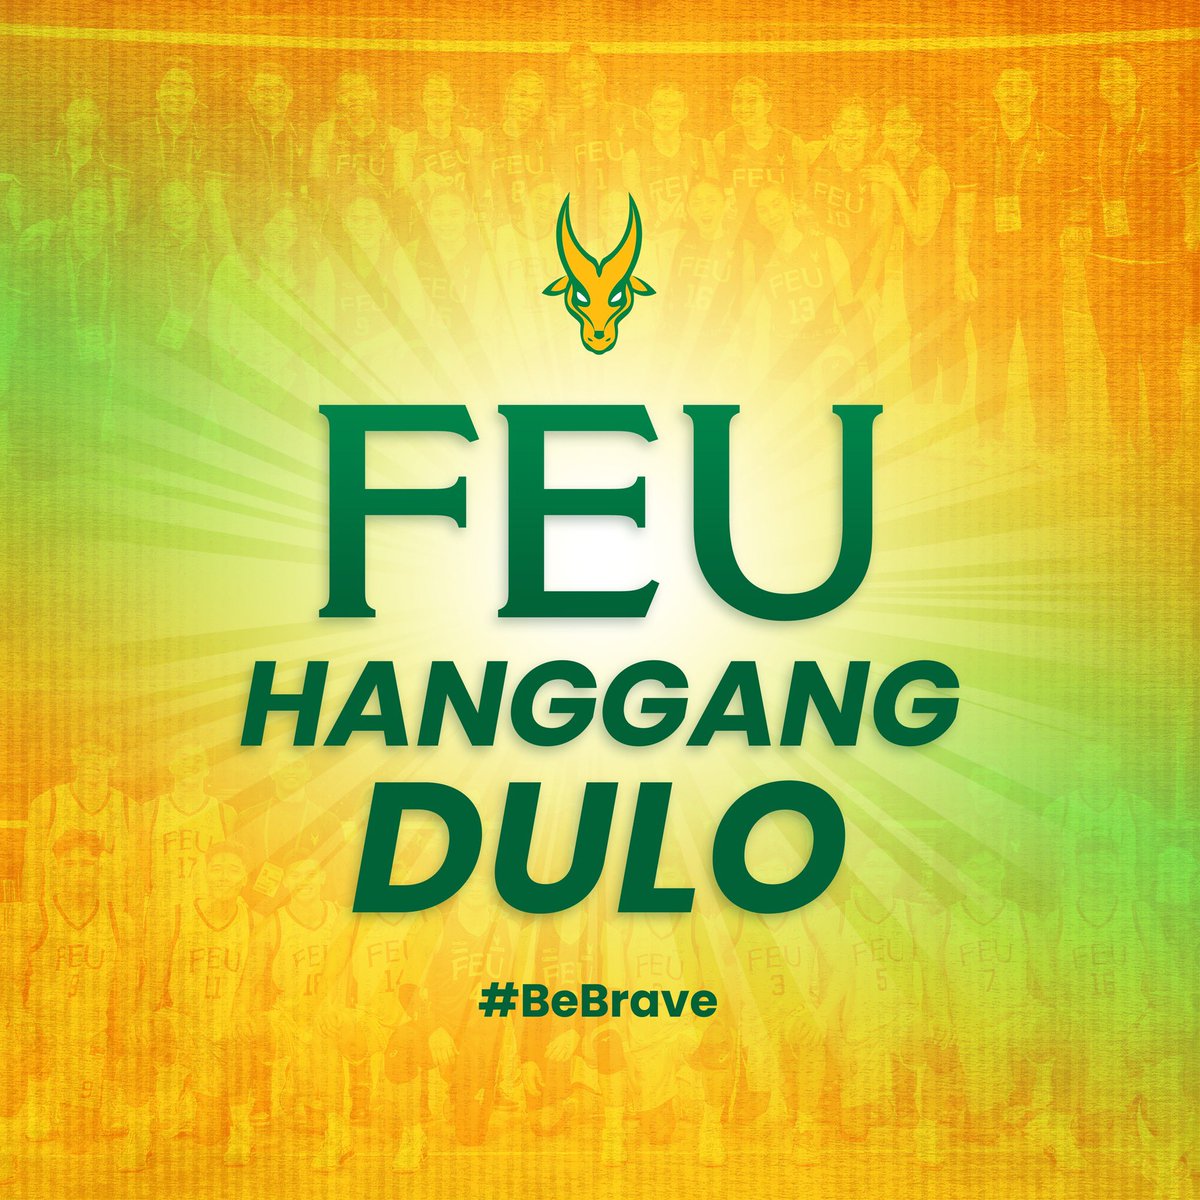 Belie🔰e, we are meant for greater things. 
All-out, all heart. 💚💛 🏐

#BeBrave #FEUMVT #FEUWVT